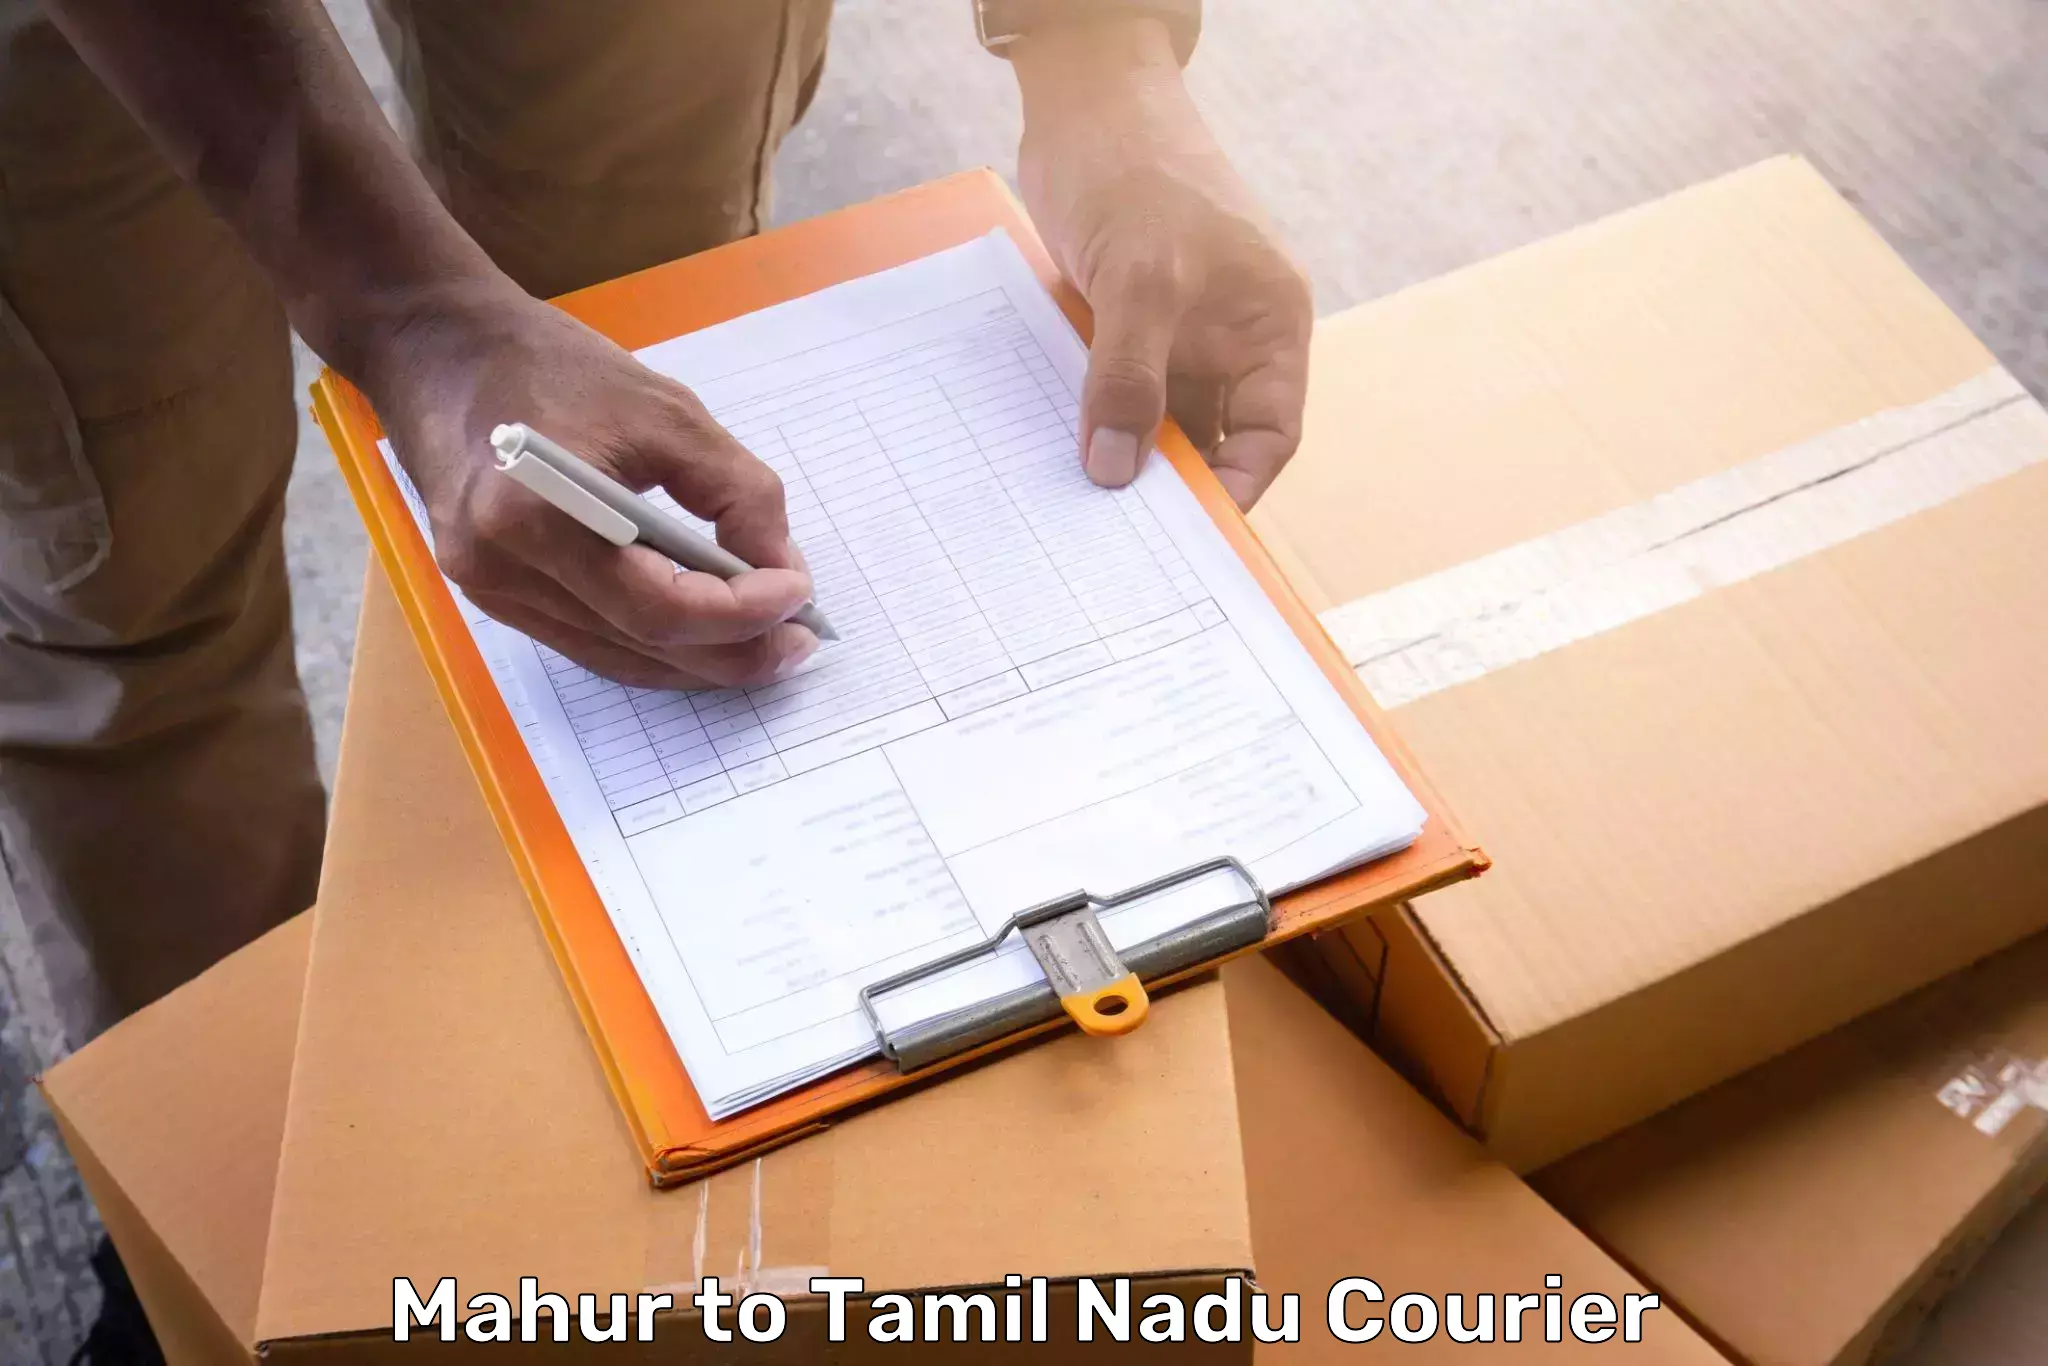 Luggage shipment specialists Mahur to Vellore